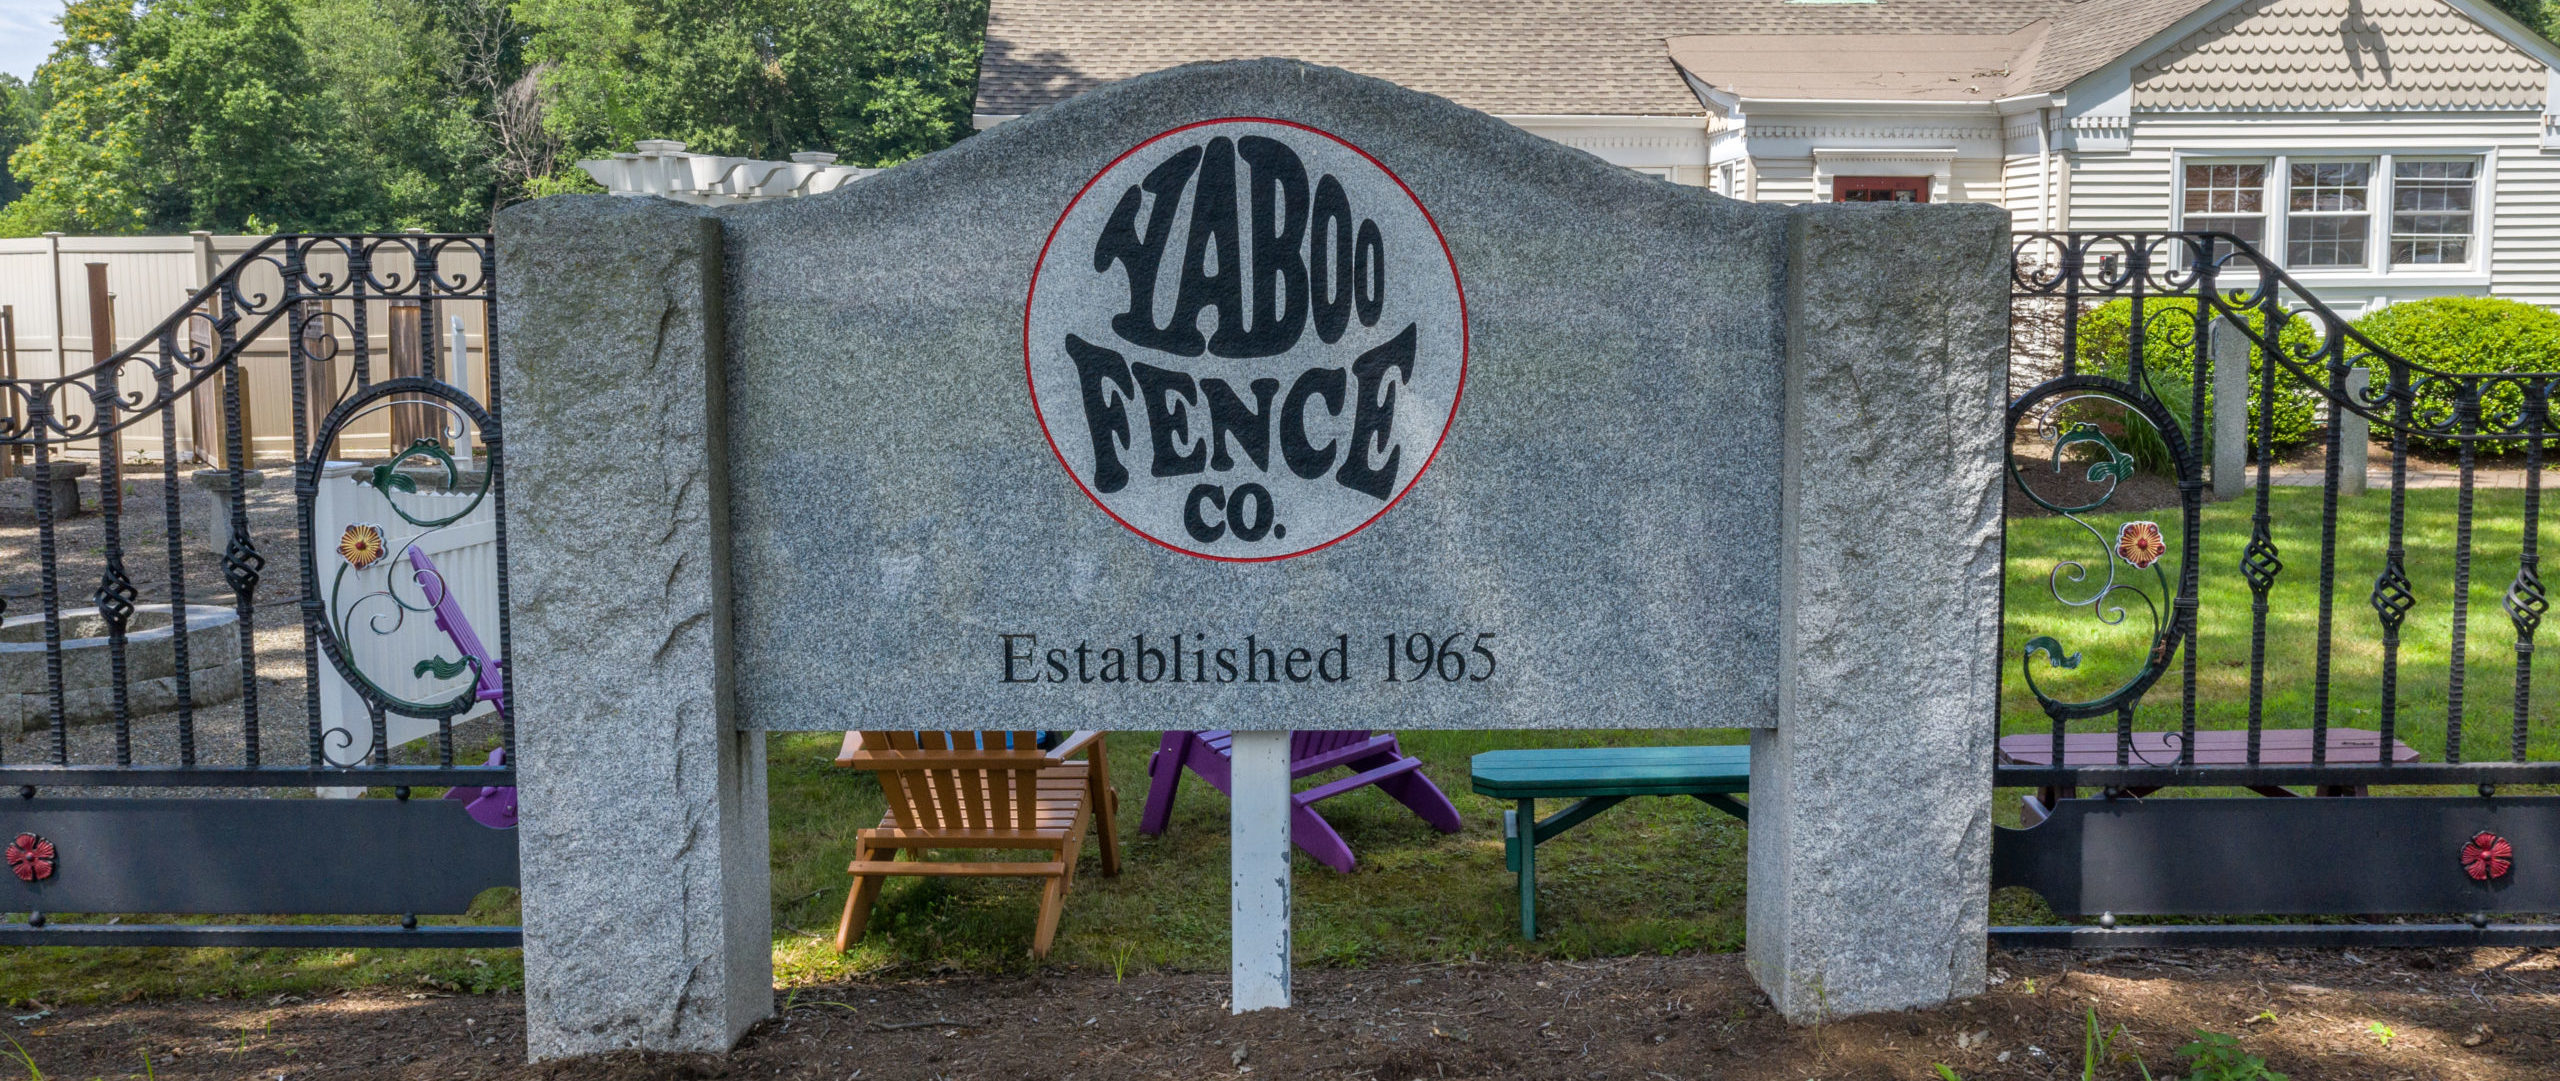 About YABOO Fence